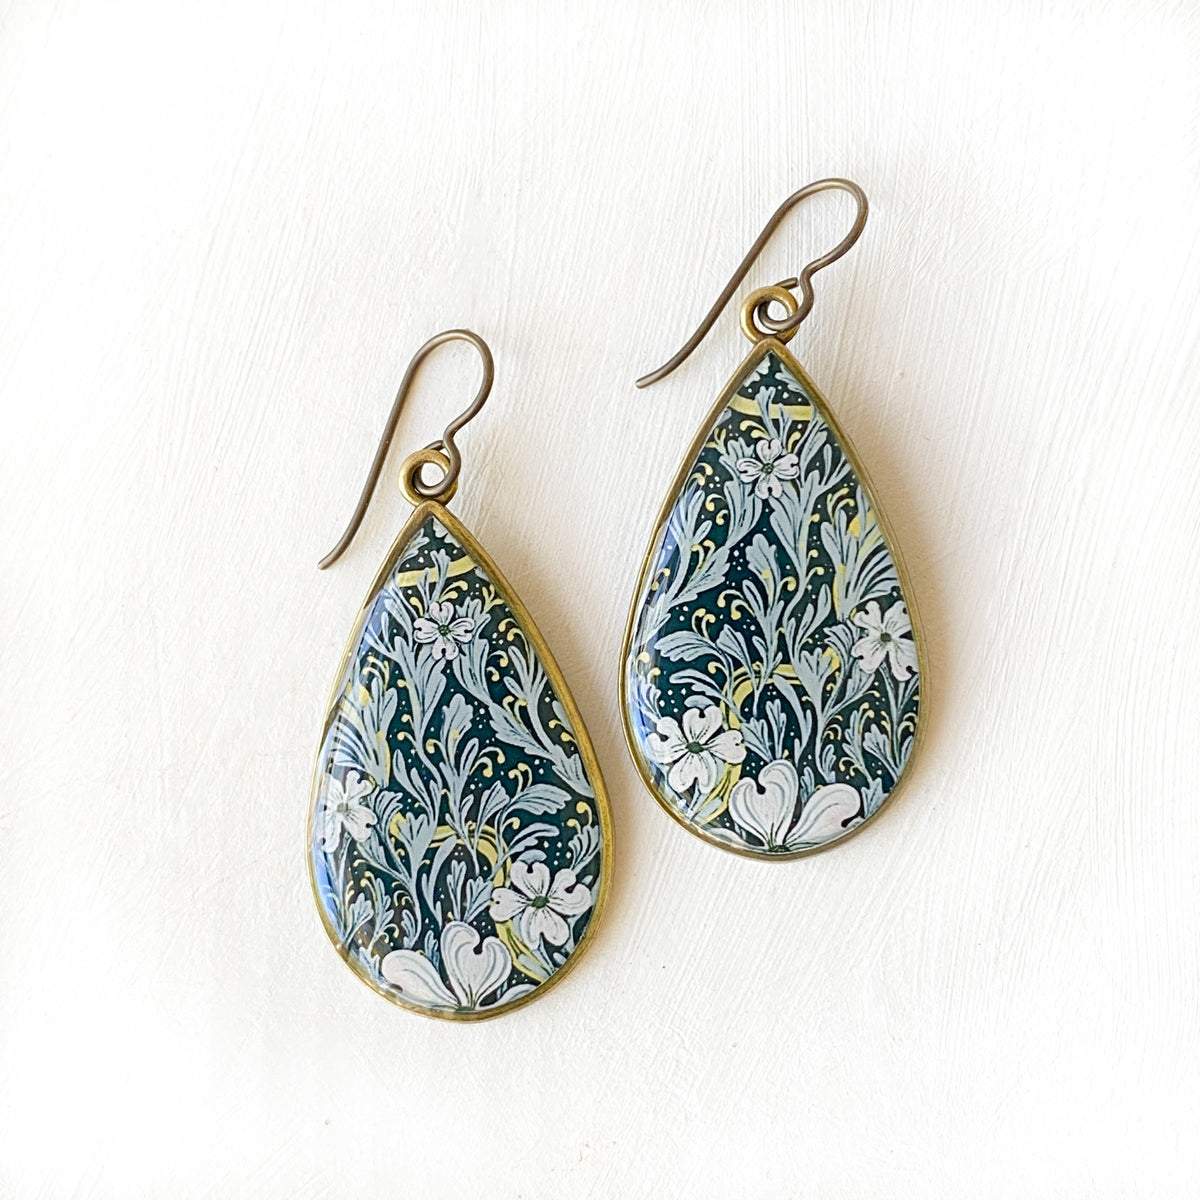 a pair of blue and white earrings on a white surface